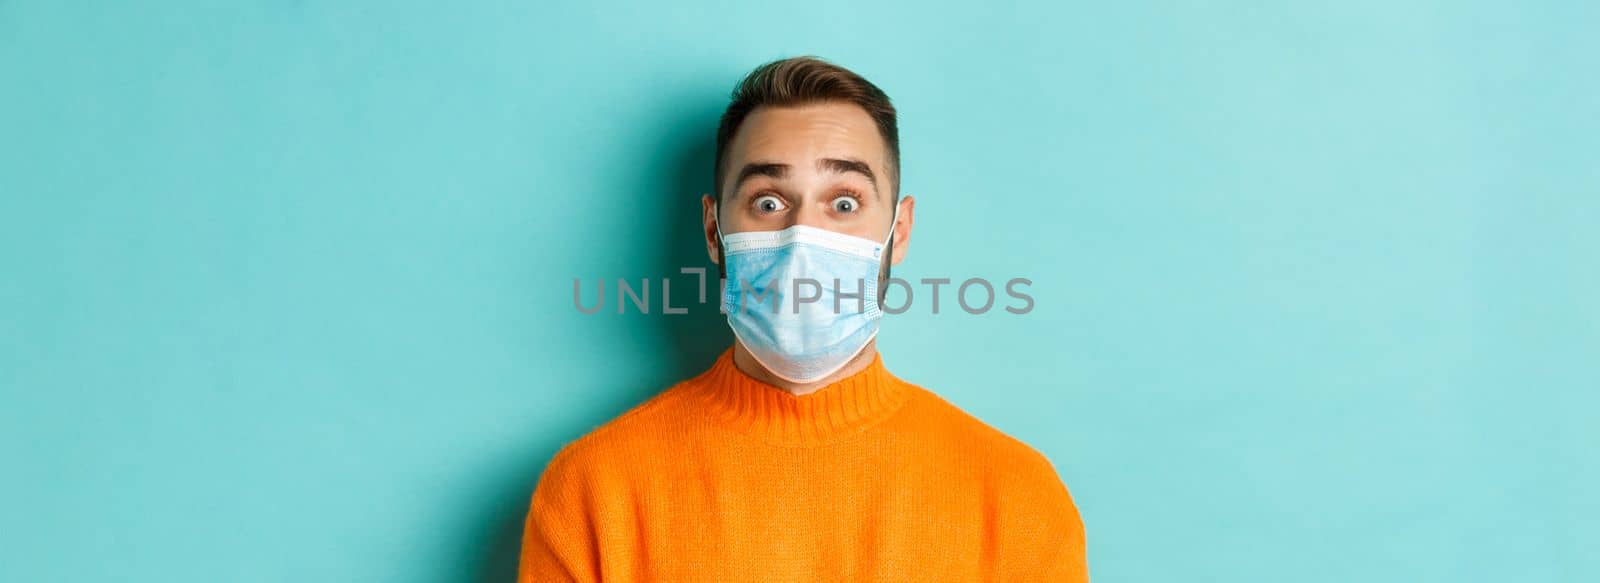 Covid-19, social distancing and quarantine concept. Close-up of young man in face mask staring at camera with surprised face, standing over turquoise background.